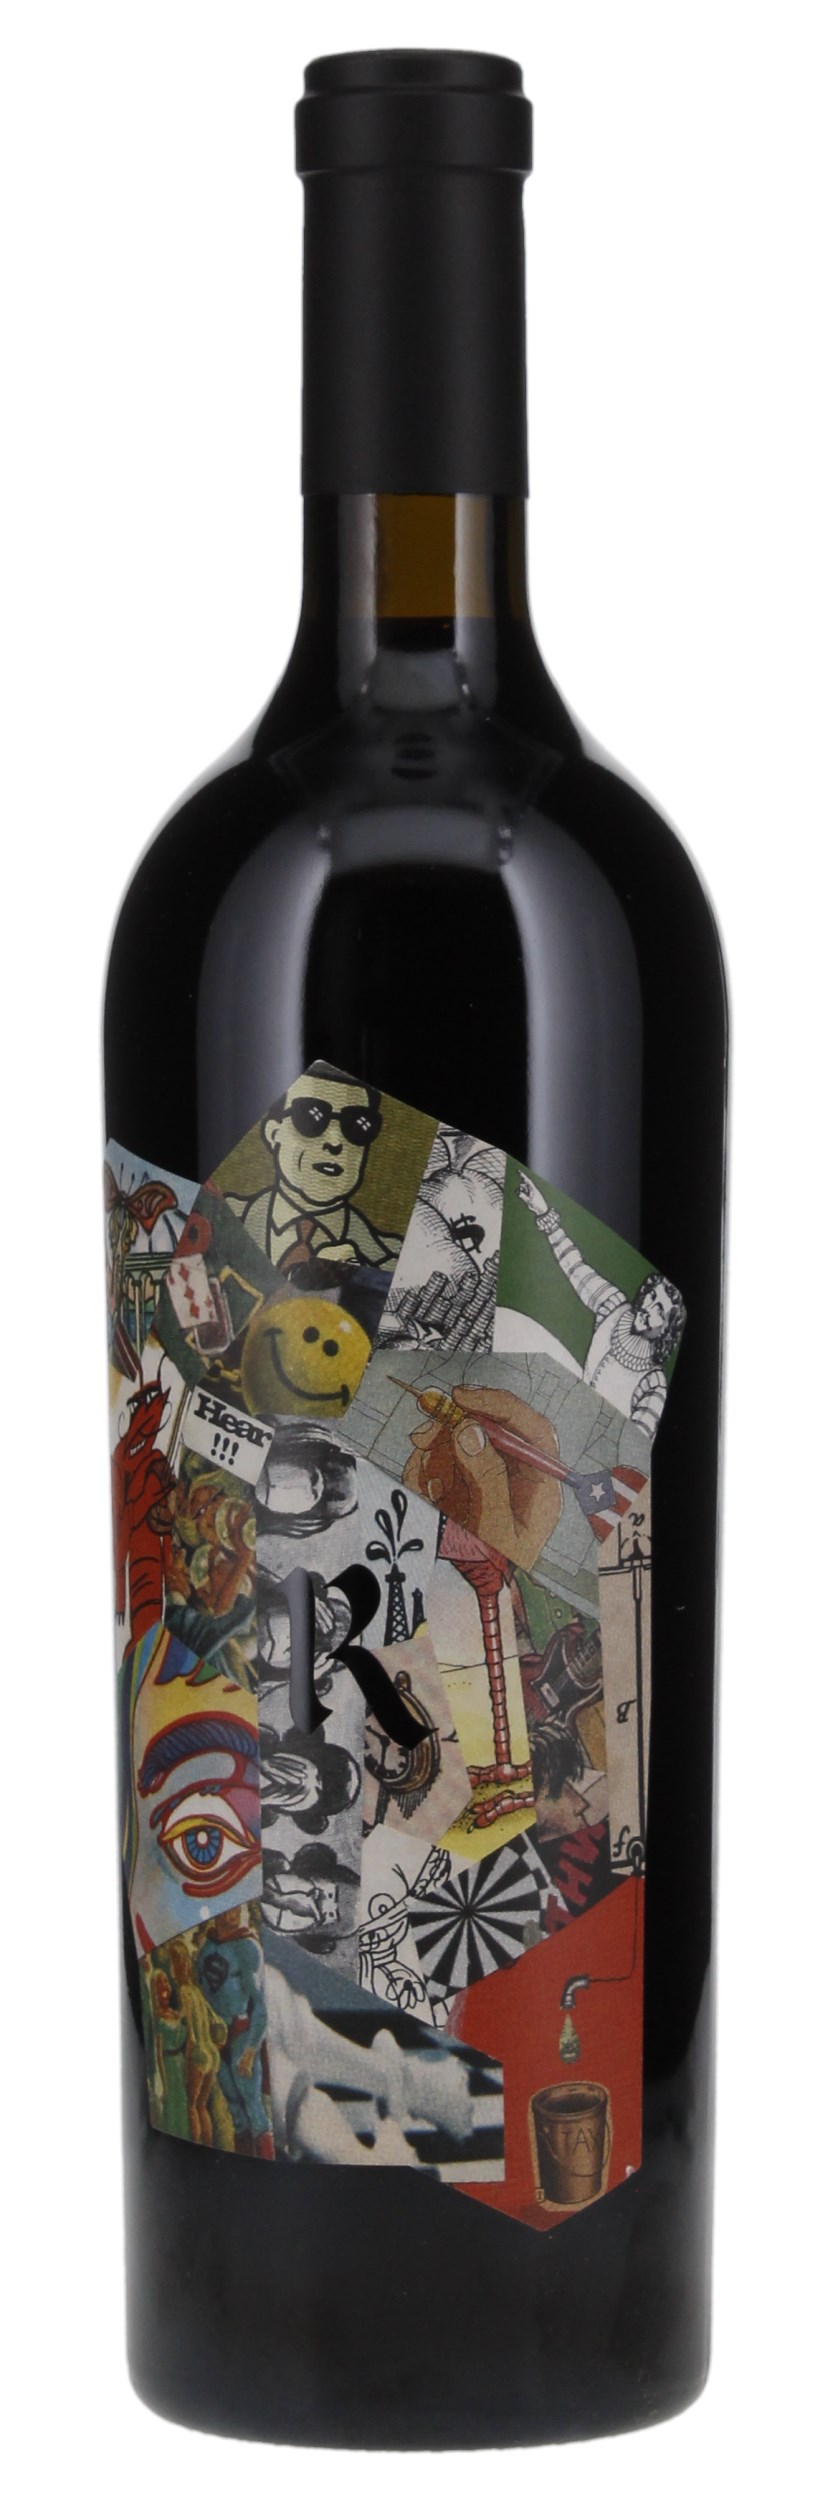 2012 Realm The Absurd, 750ml